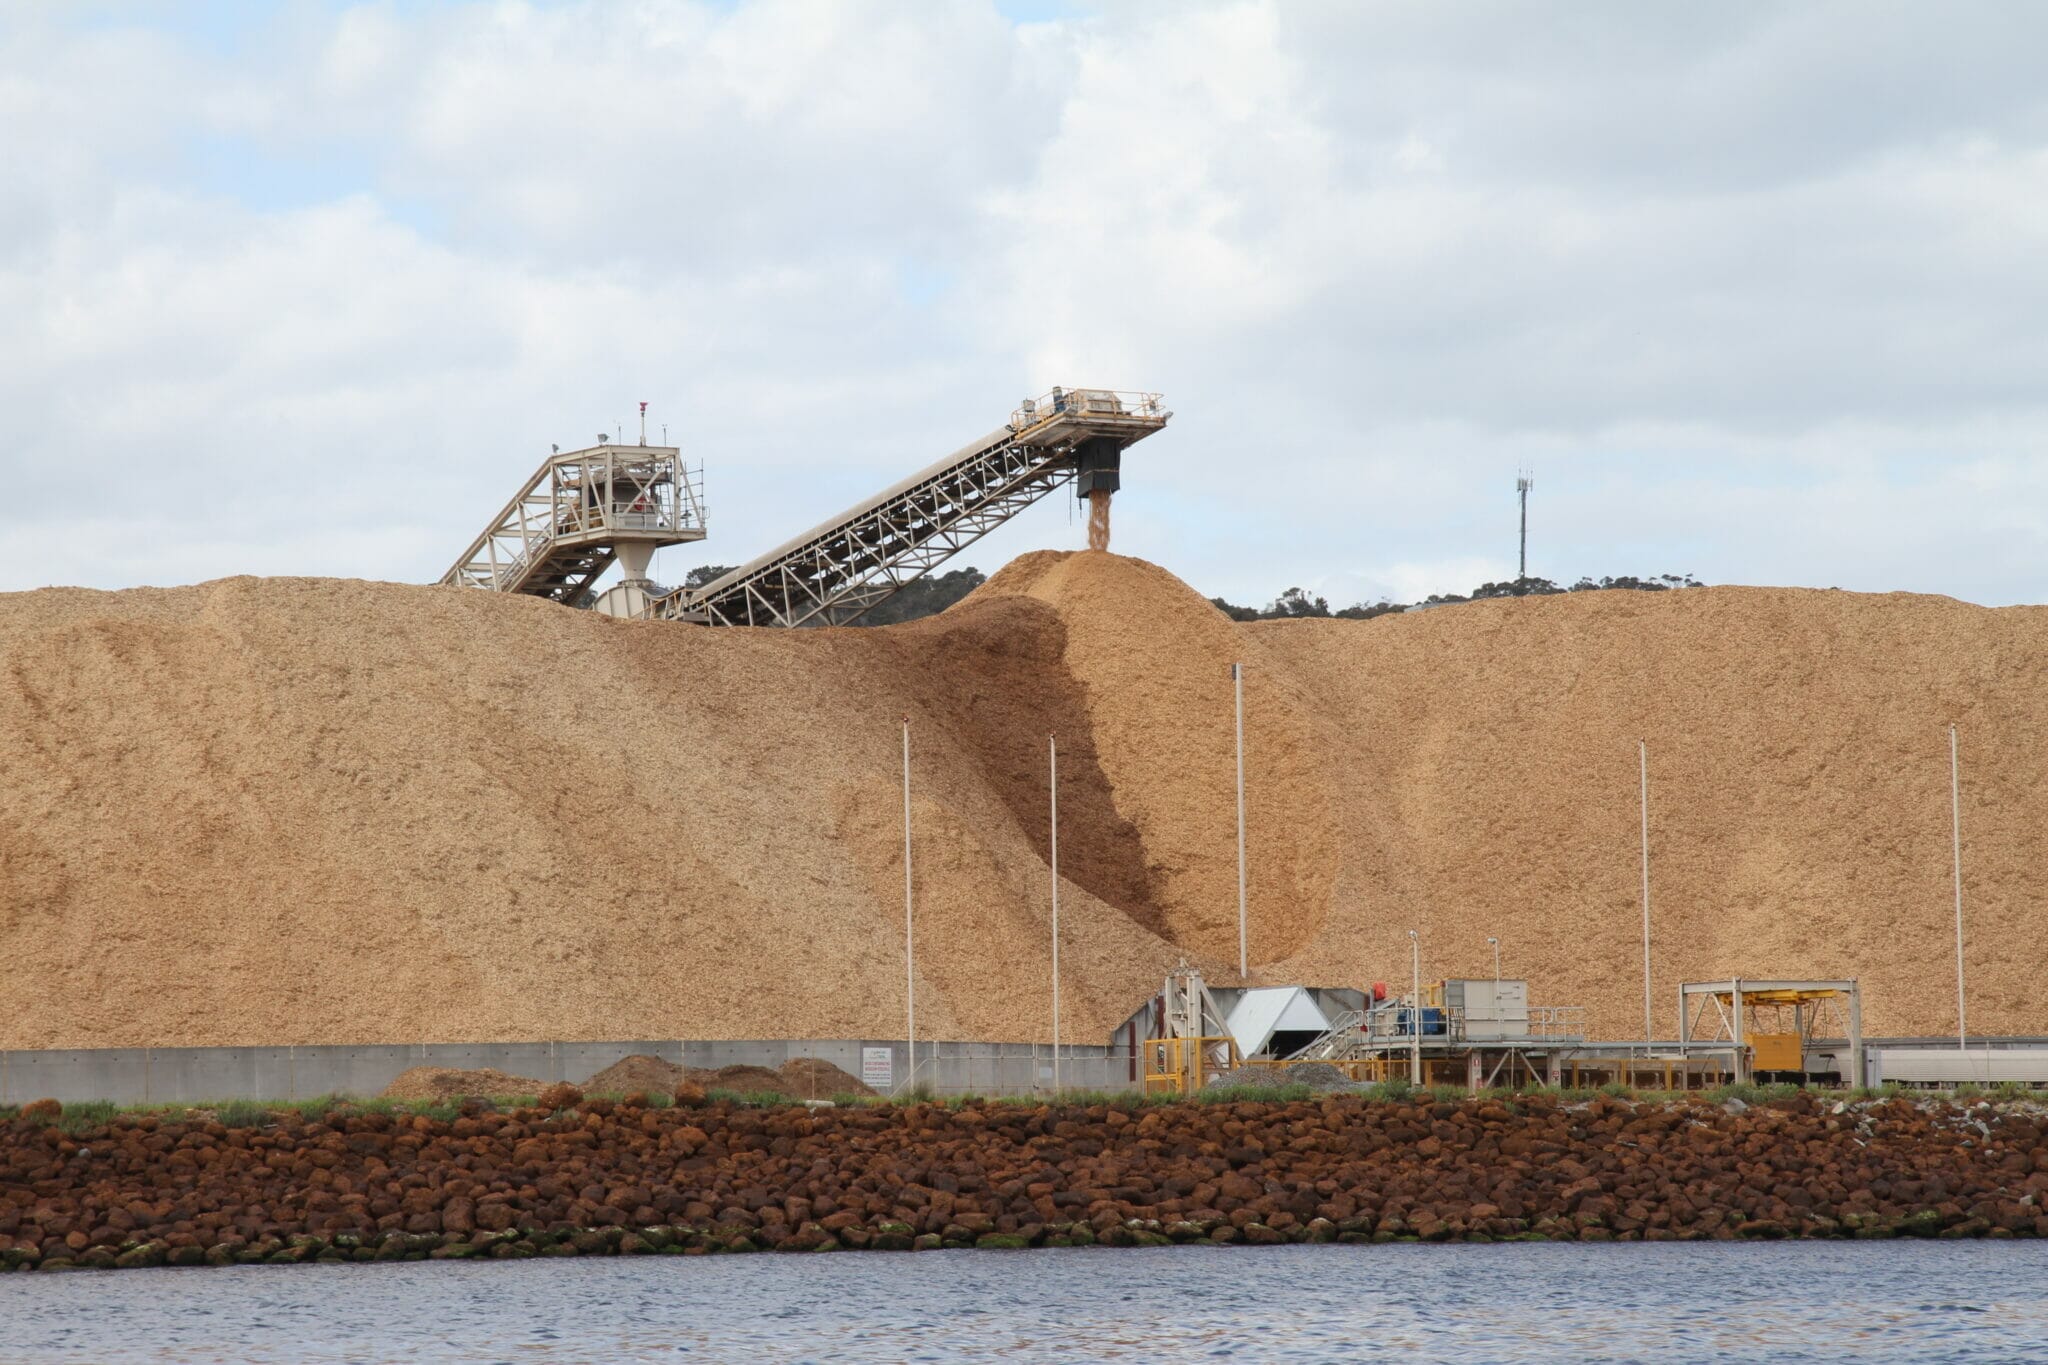 Wood chipping at the Albany Grain Terminal on the way out to King George Sound